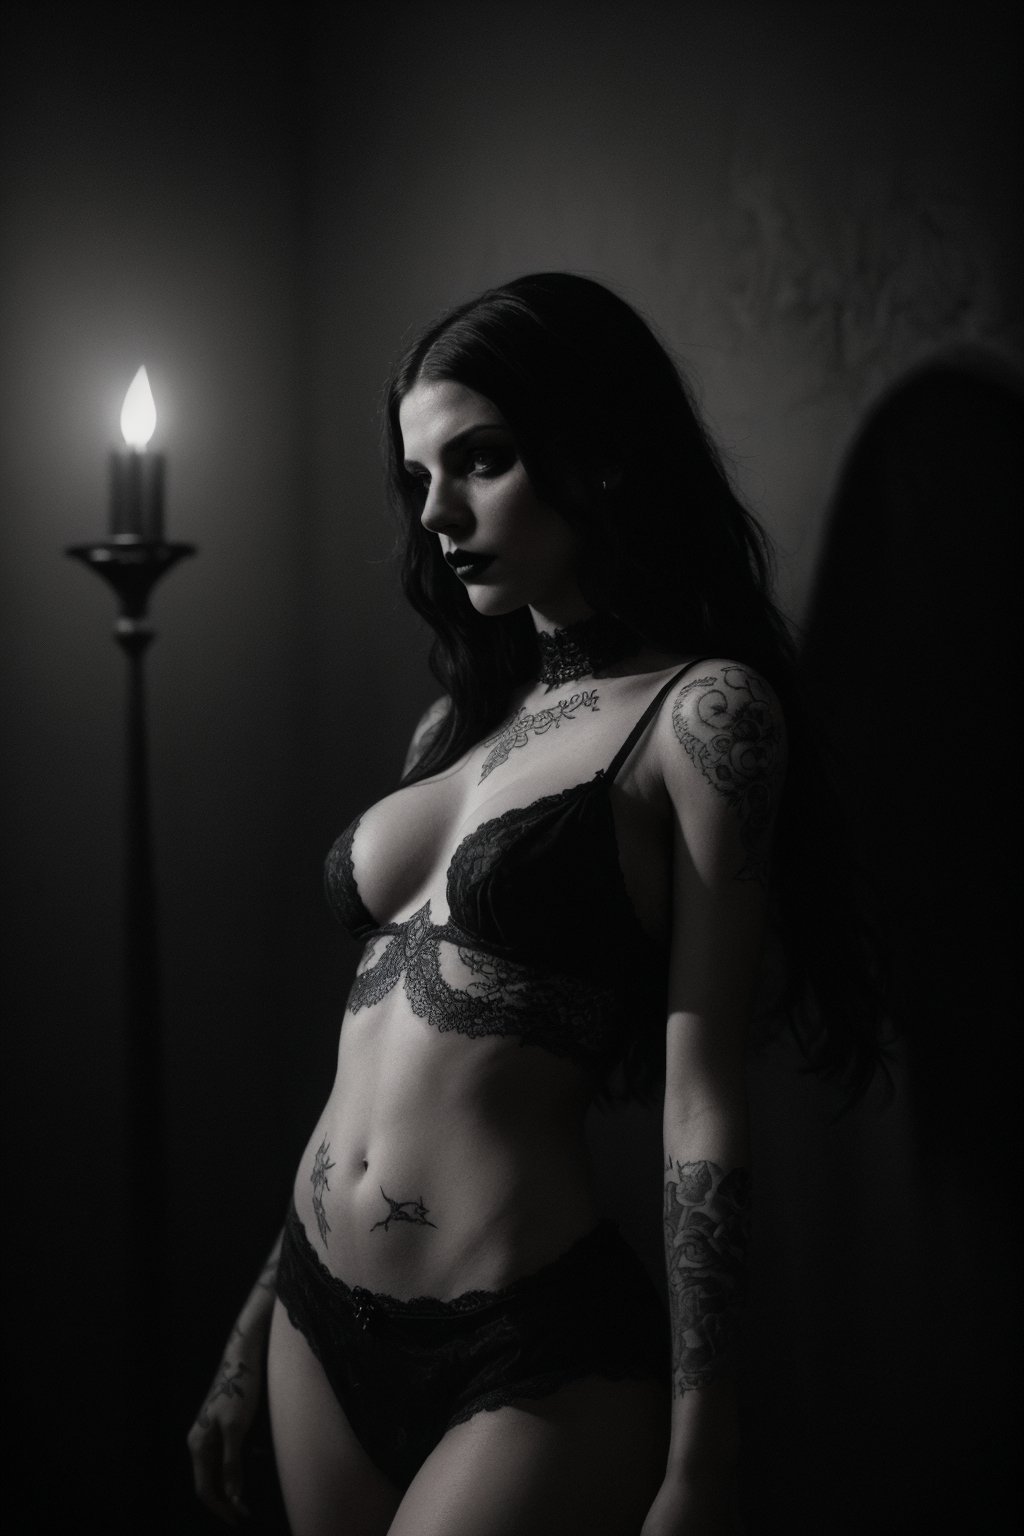 goth girl, black lipstick, ((tattooed)), (Rembrandt style), (full body), (dynamic angle), (dynamic pose), Oil painting featuring a figure embodying pain and sadness mingling with erotism, lace accents adorning their form, plunged in a dark ambience, sharp details in a play of contrast, black and white palette, (grayscale), emphasis on textured brushwork, expressive facial features partially veiled by shadows, chiaroscuro technique, rich details, 8k, intricate details, atmospheric lighting, 35mm photograph, professional, highly detailed, high budget, moody, epic, gorgeous, proportional,